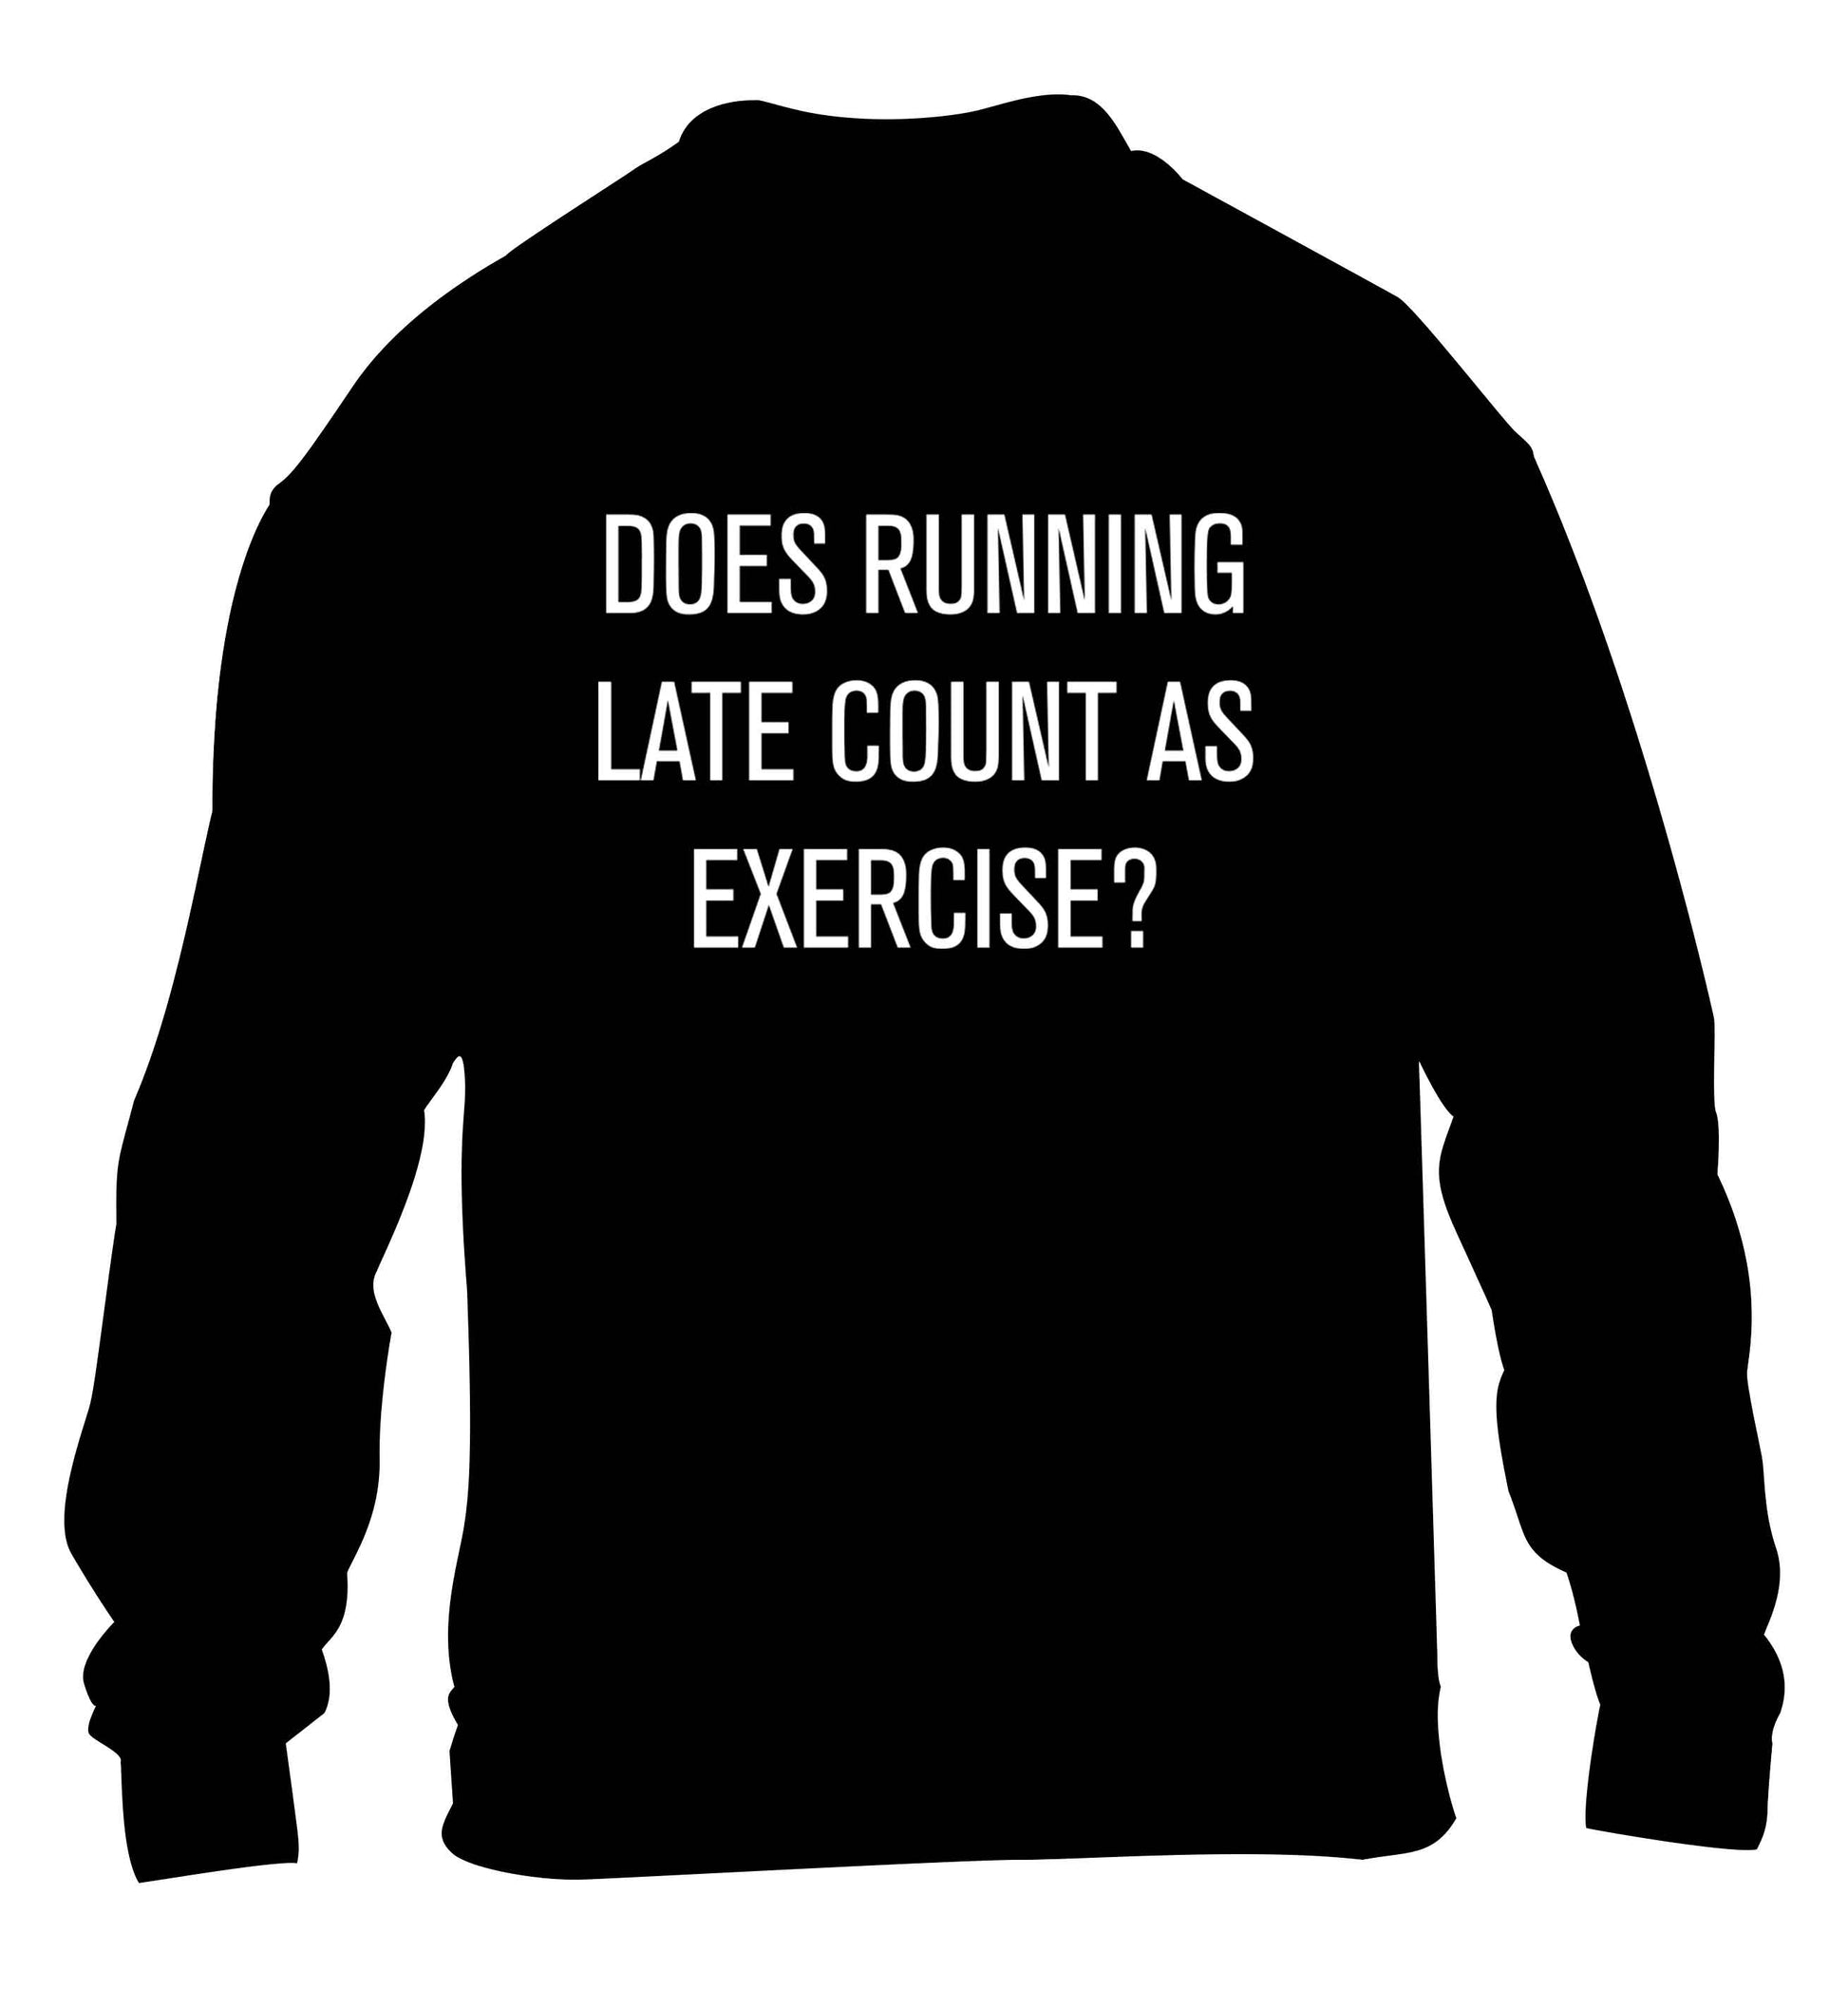 Does running late count as exercise? children's black sweater 12-13 Years